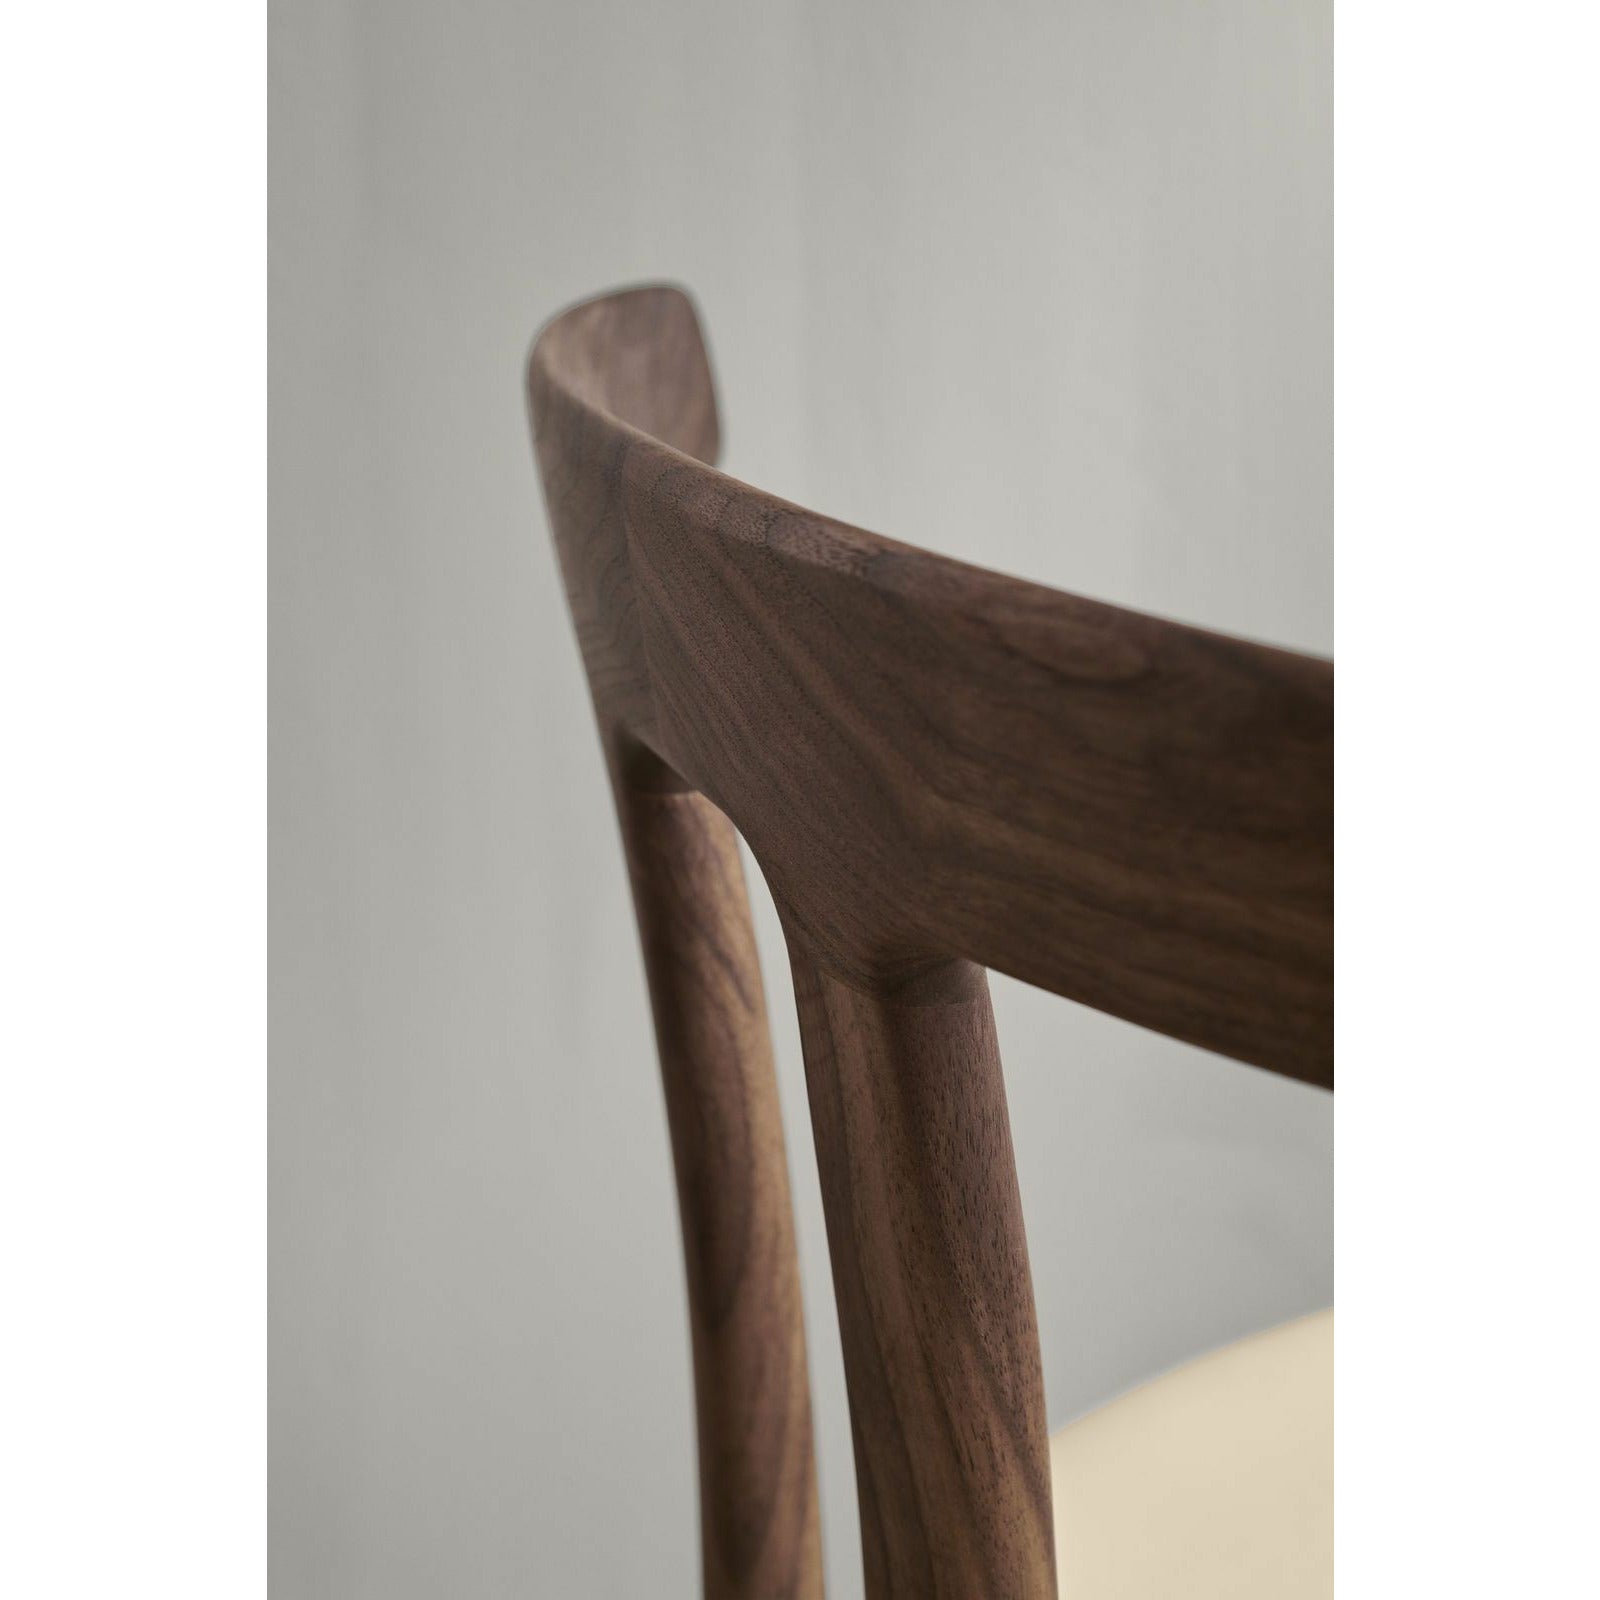 Carl Hansen Ow58 T Chair Walnut Oiled, Sif 90 Leather